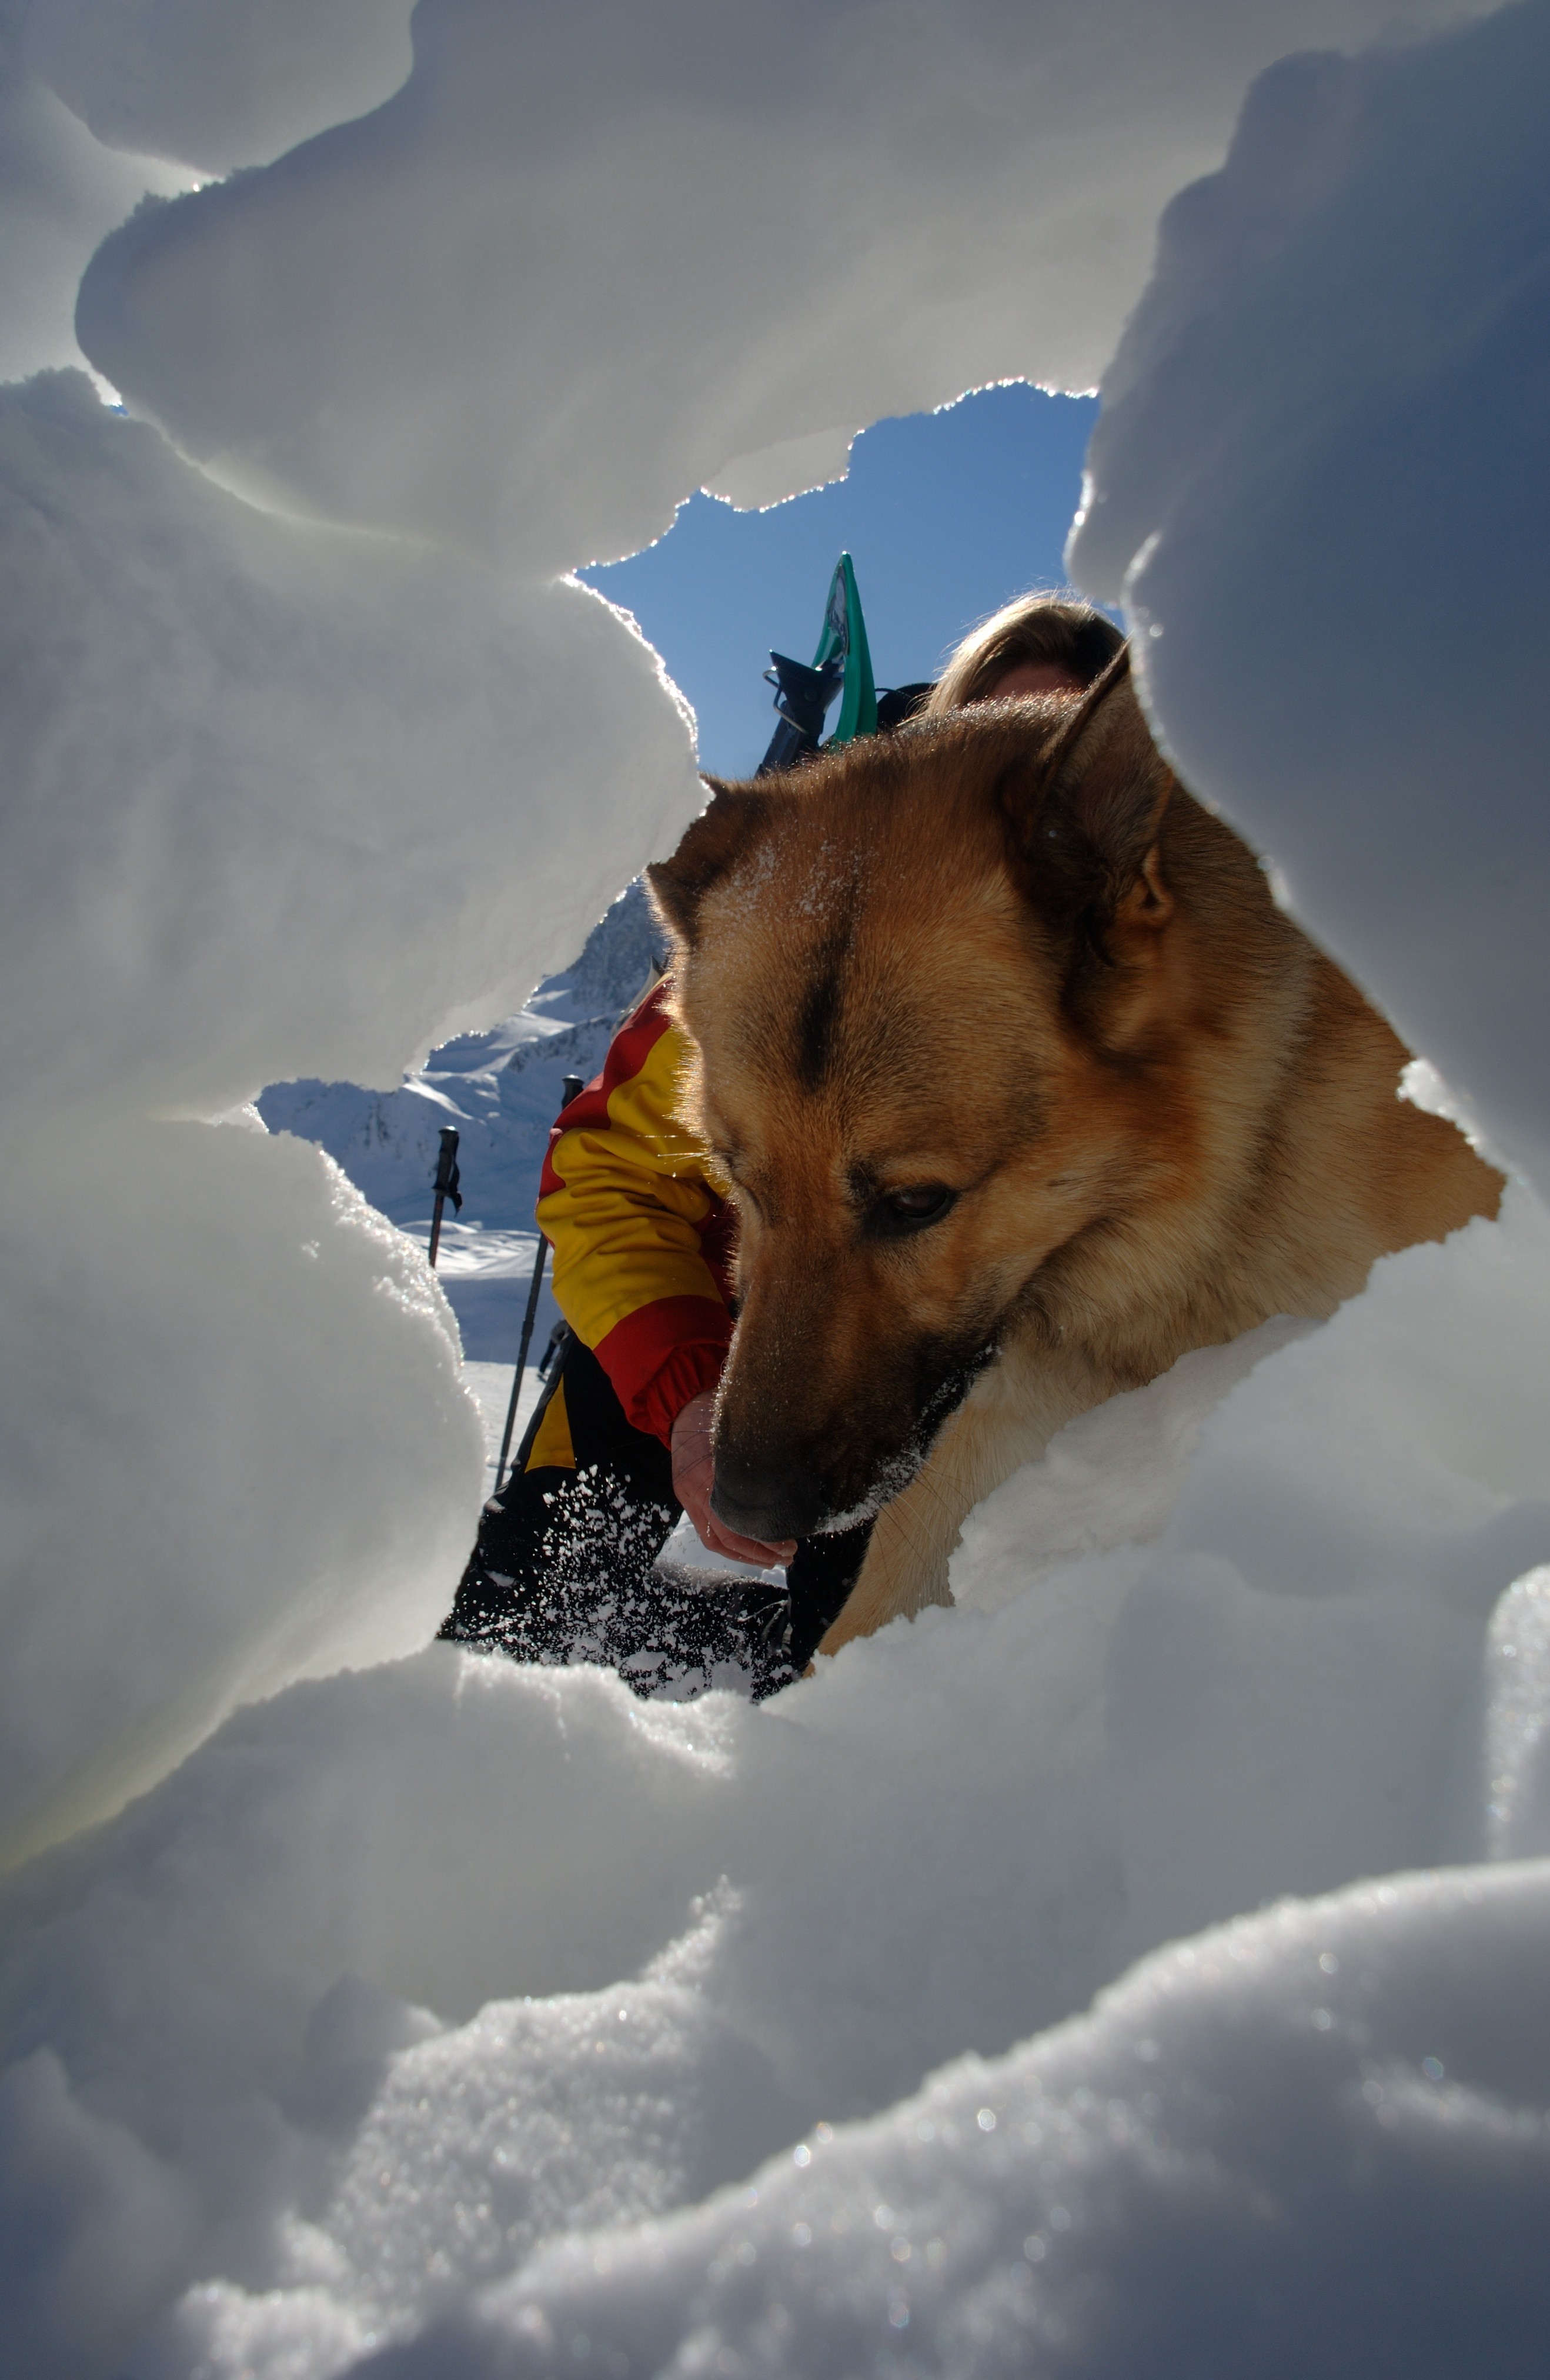 An avalanche rescue dog undergoes training. Photo: Philippe Royer/Gamma-Rapho via Getty Images